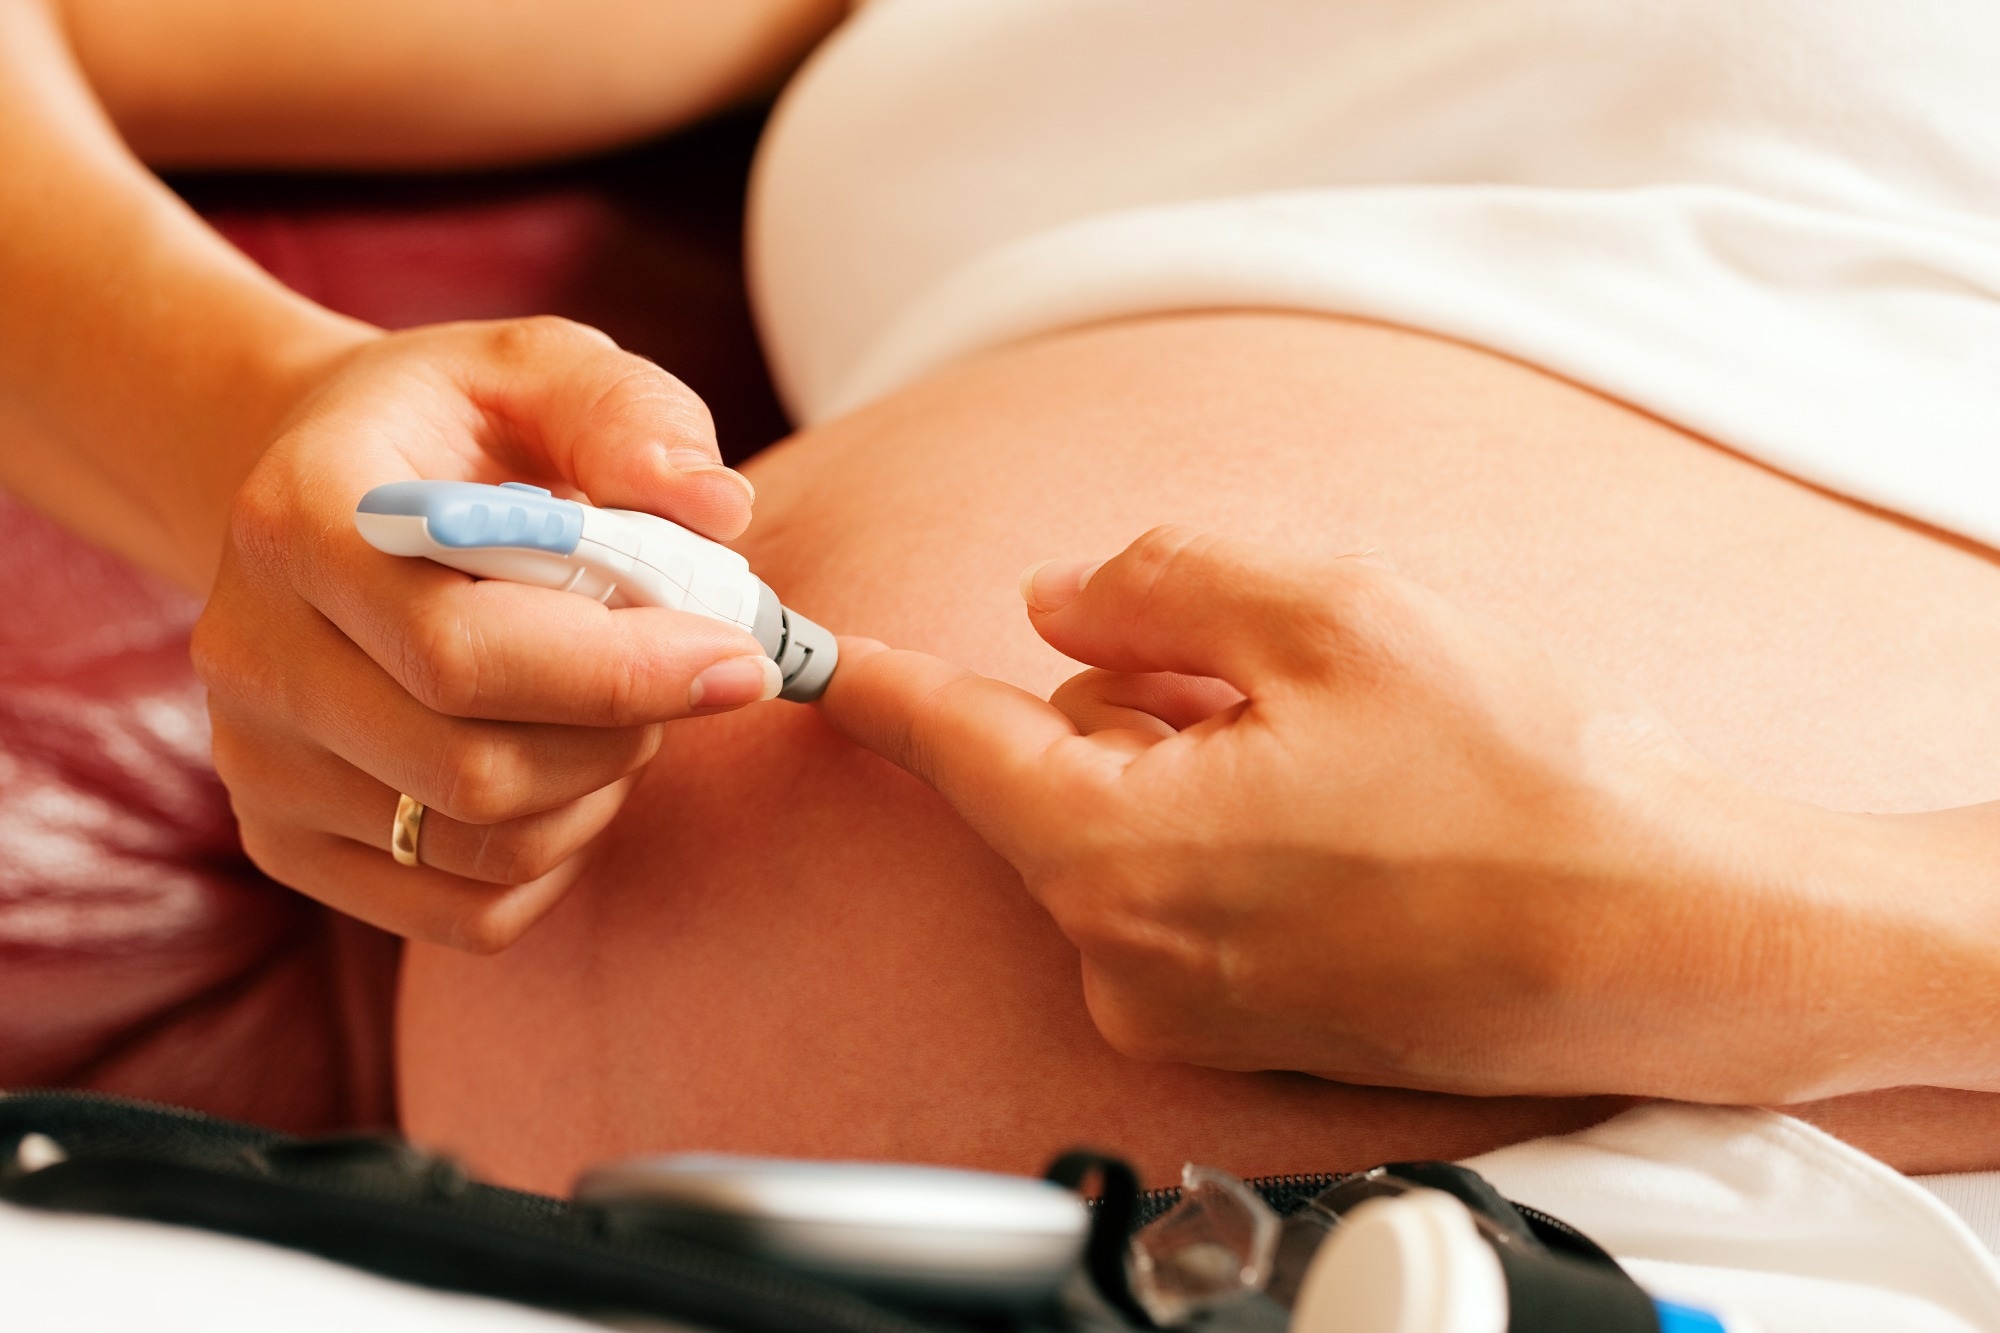 Study: Evidence of lifestyle interventions in a pregnant population with chronic hypertension and/or pre-existing diabetes: A systematic review and narrative synthesis. Image Credit: Kzenon / Shutterstock